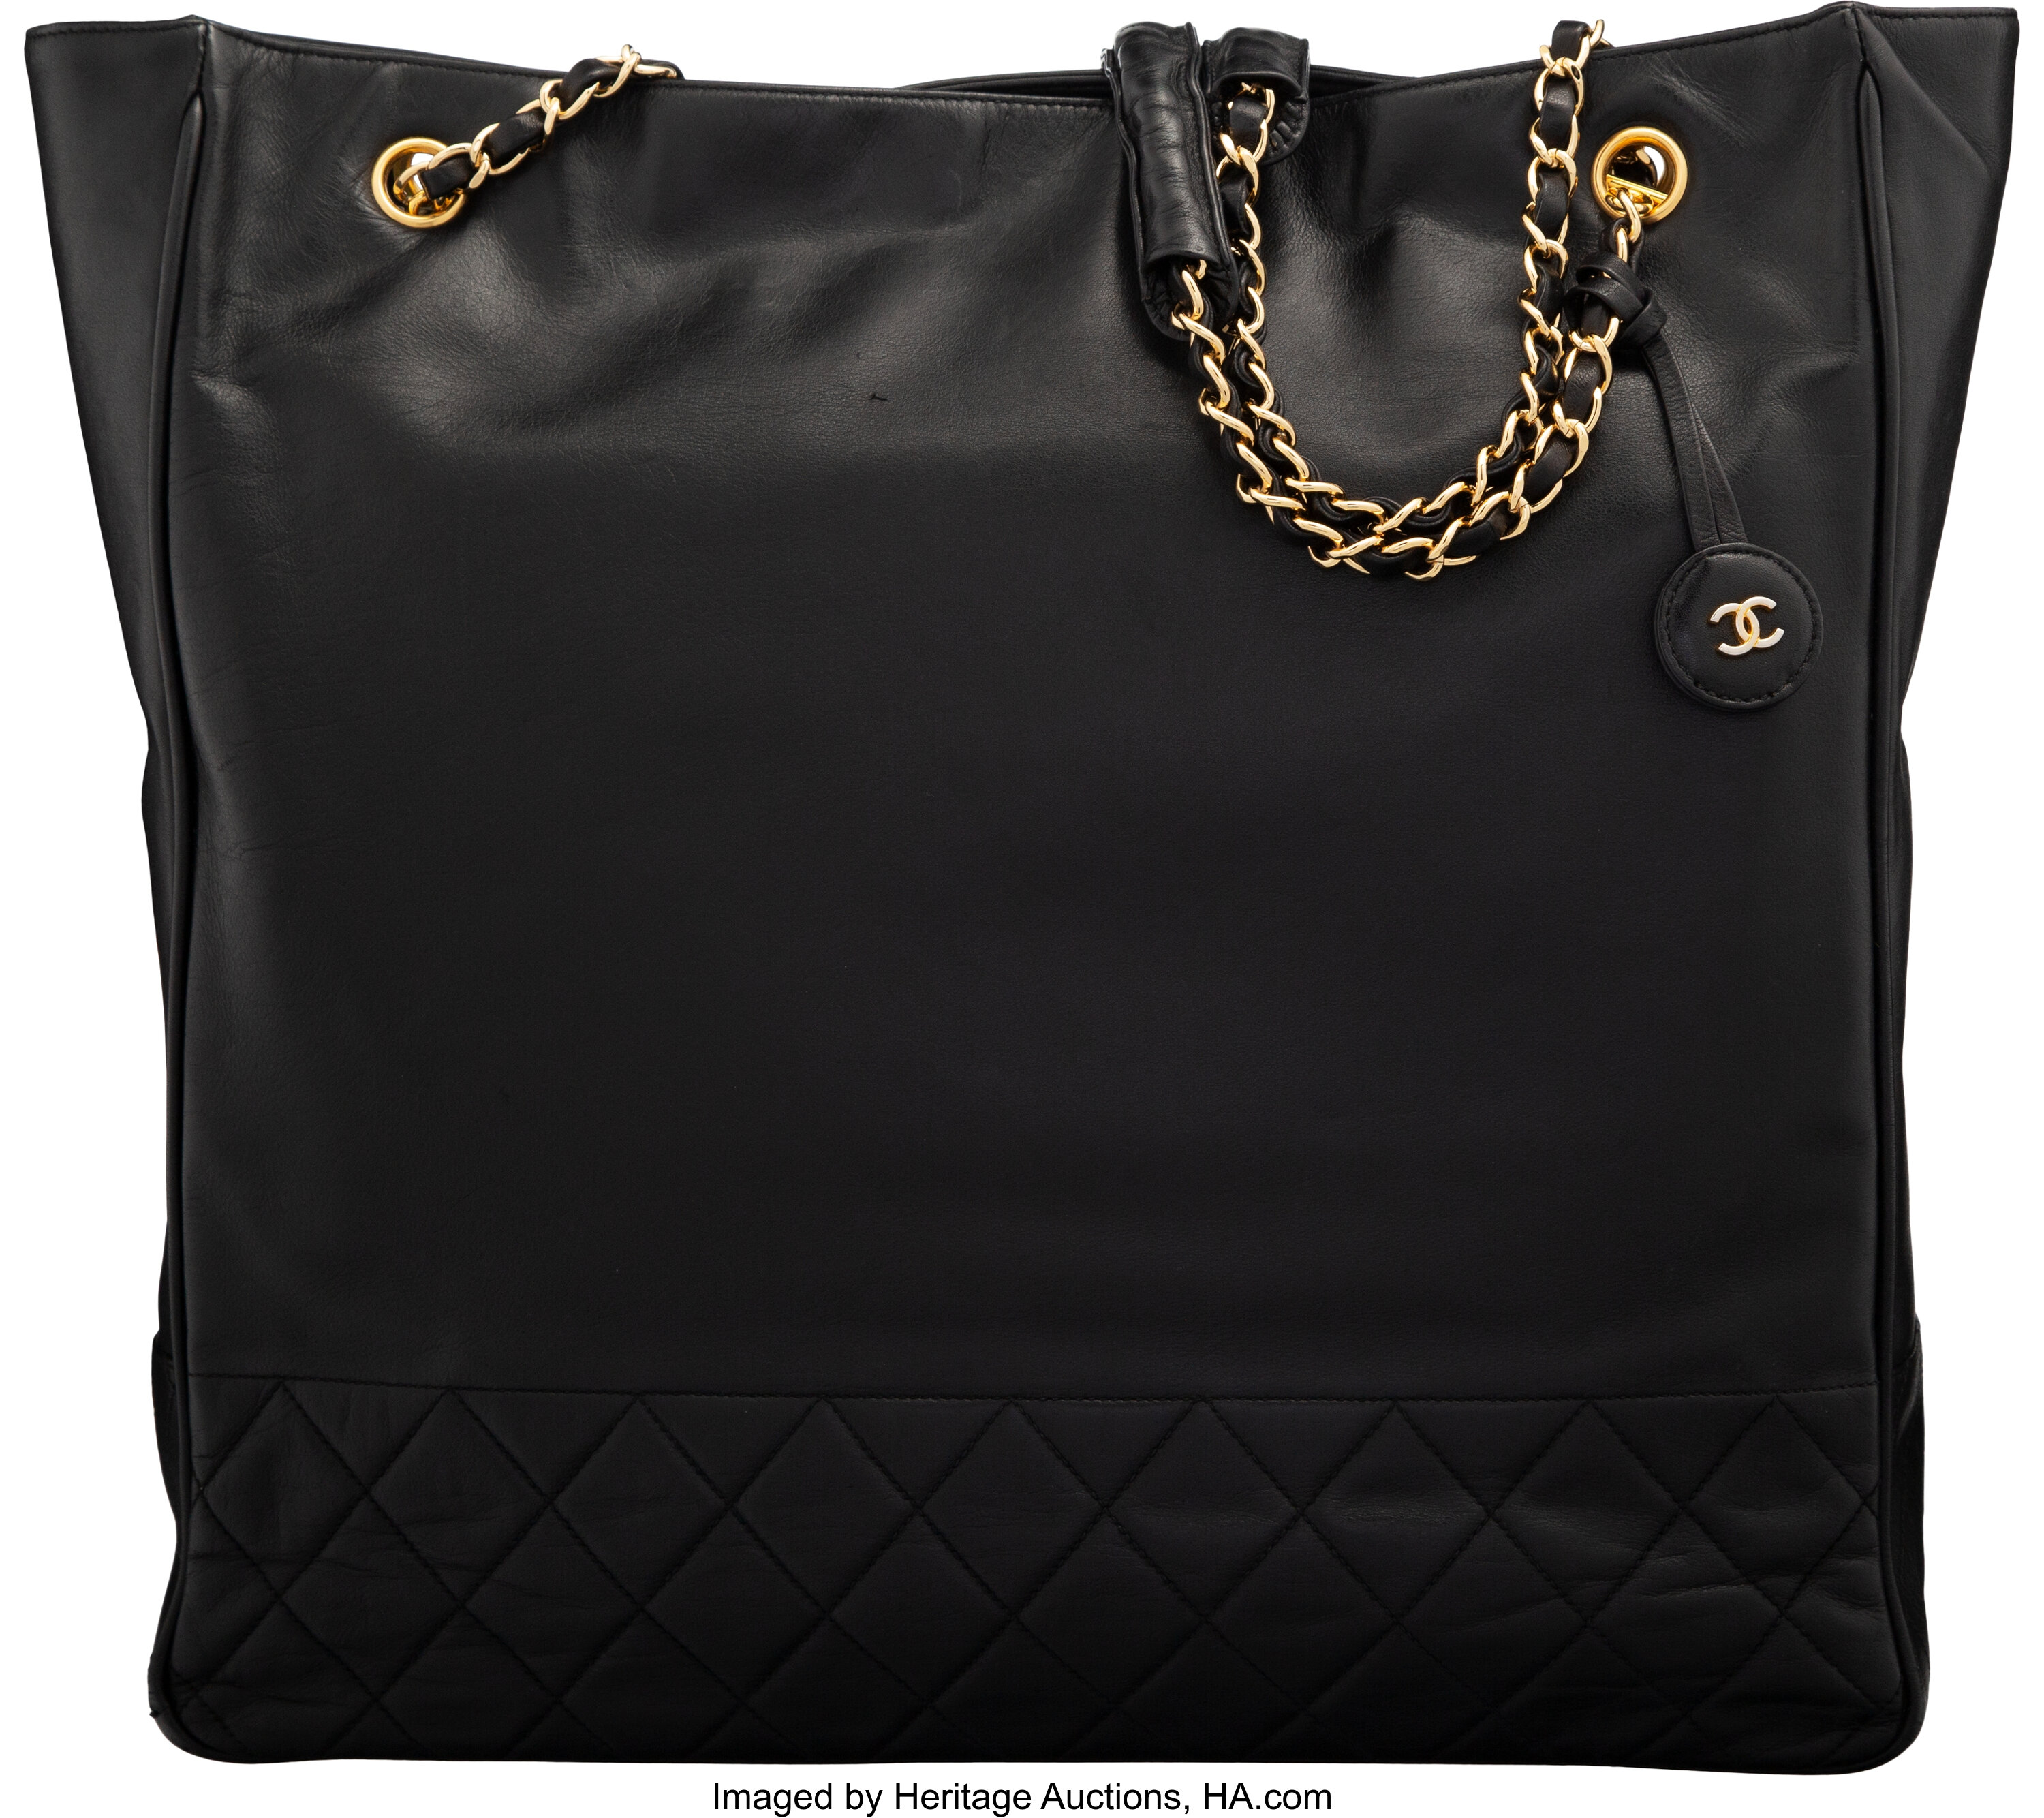 Chanel Black Calfskin Leather Shopping Tote Bag with Gold Hardware